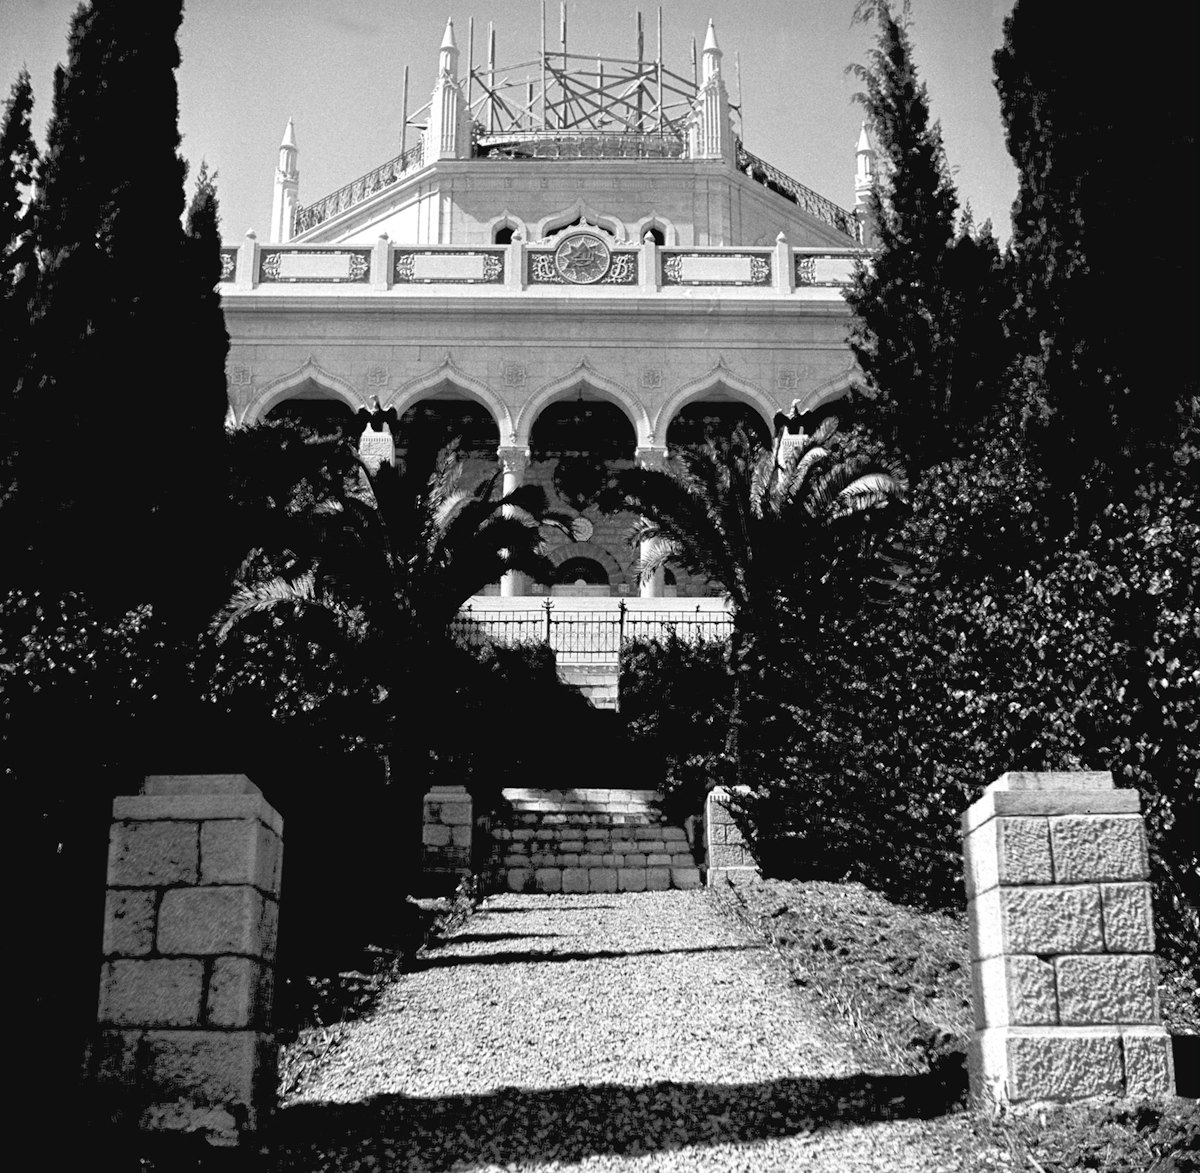 A view of the Shrine of the Bab while the drum was under construction, from a terrace below, 1952.